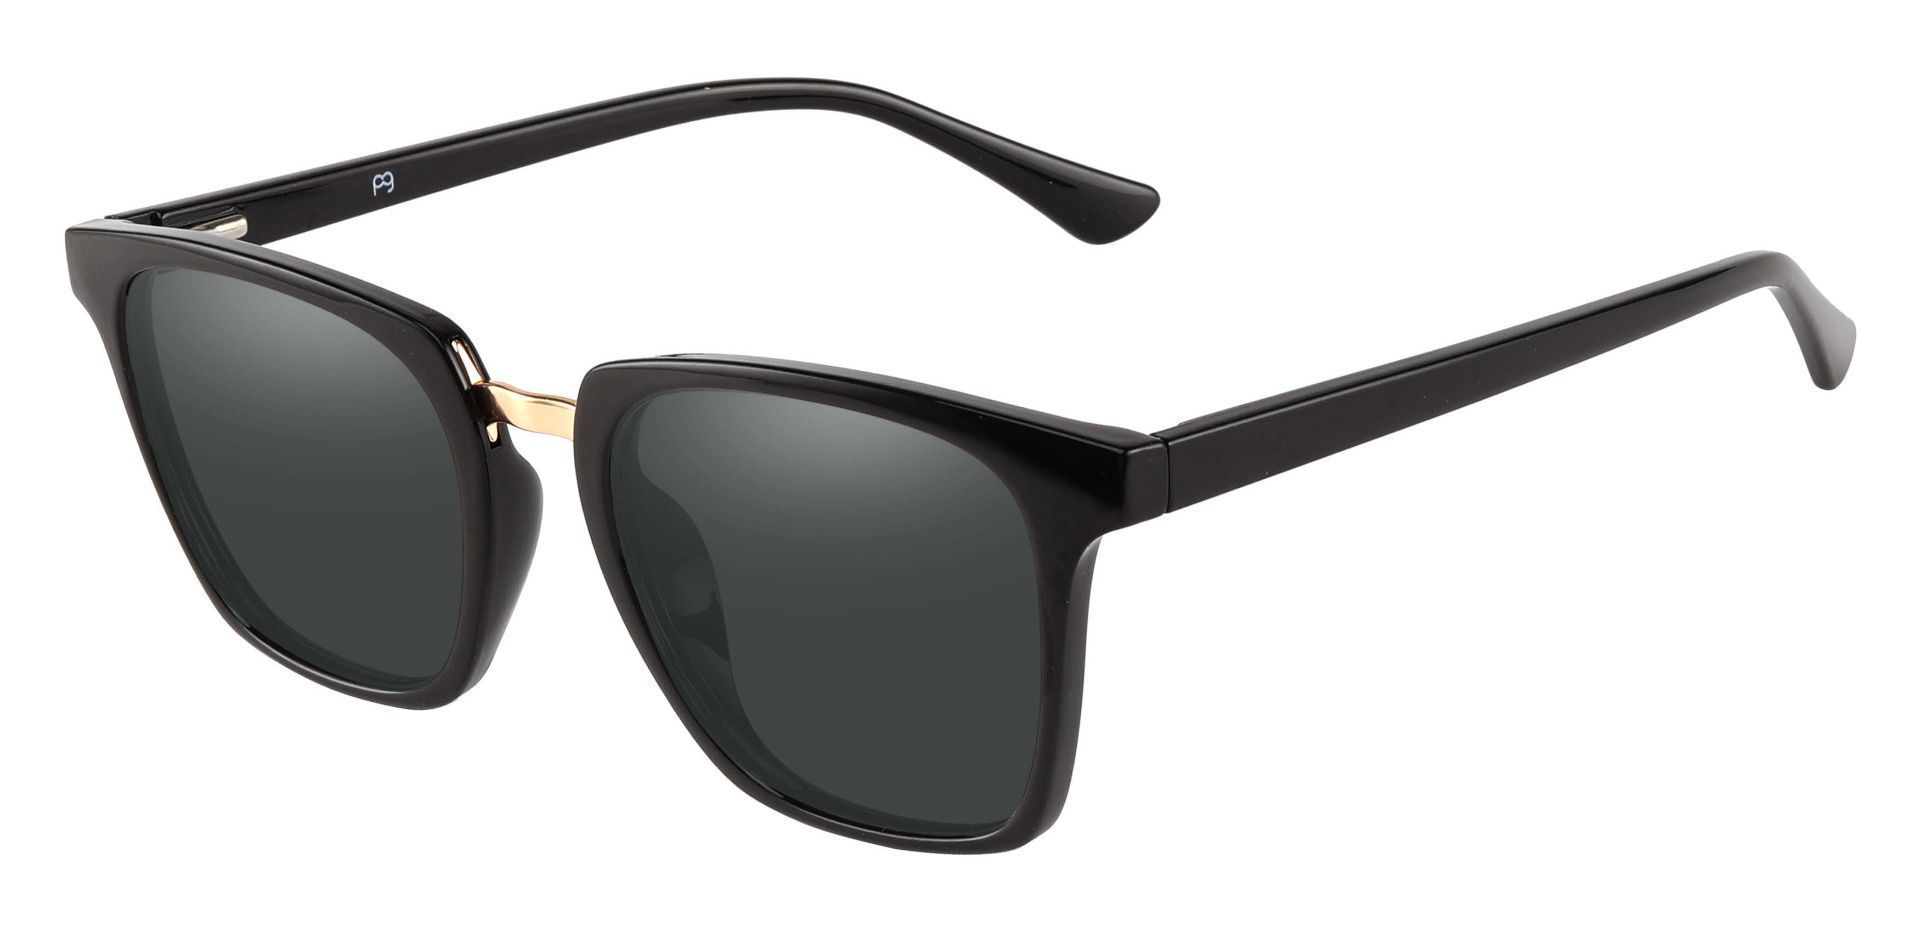 Delta Square Lined Bifocal Sunglasses - Black Frame With Gray Lenses